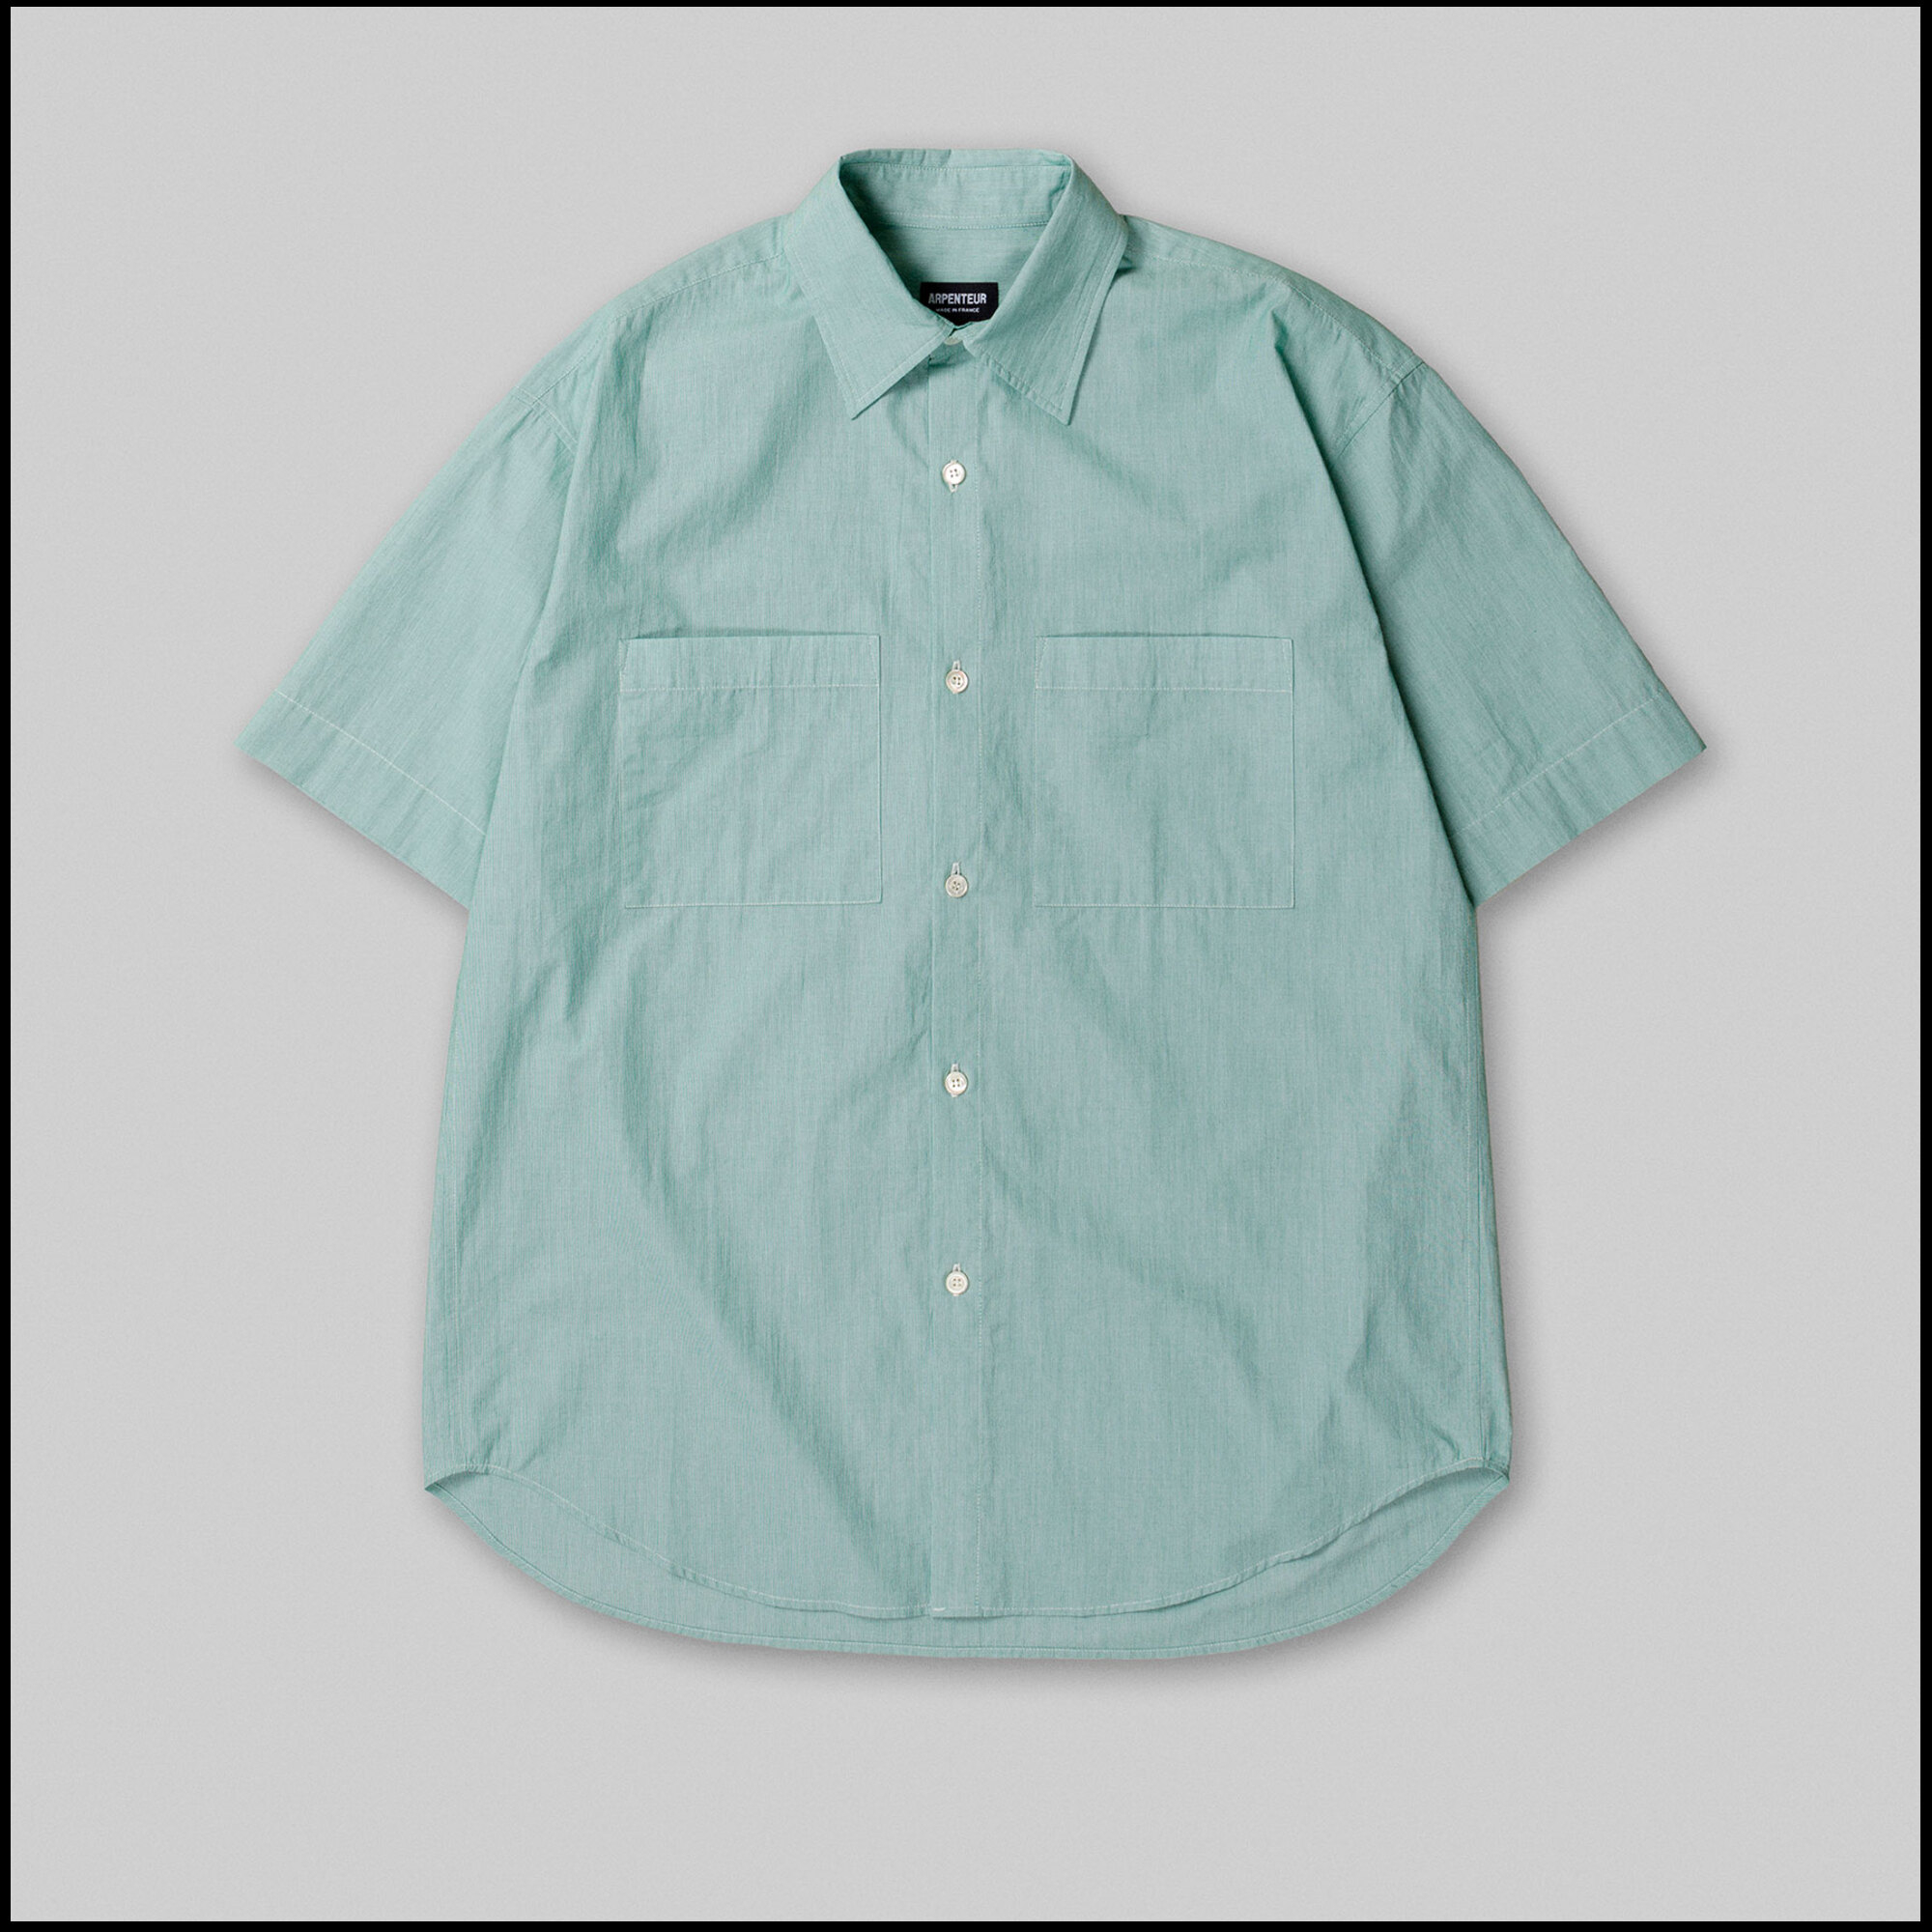 STEREO shirt by Arpenteur in Green color